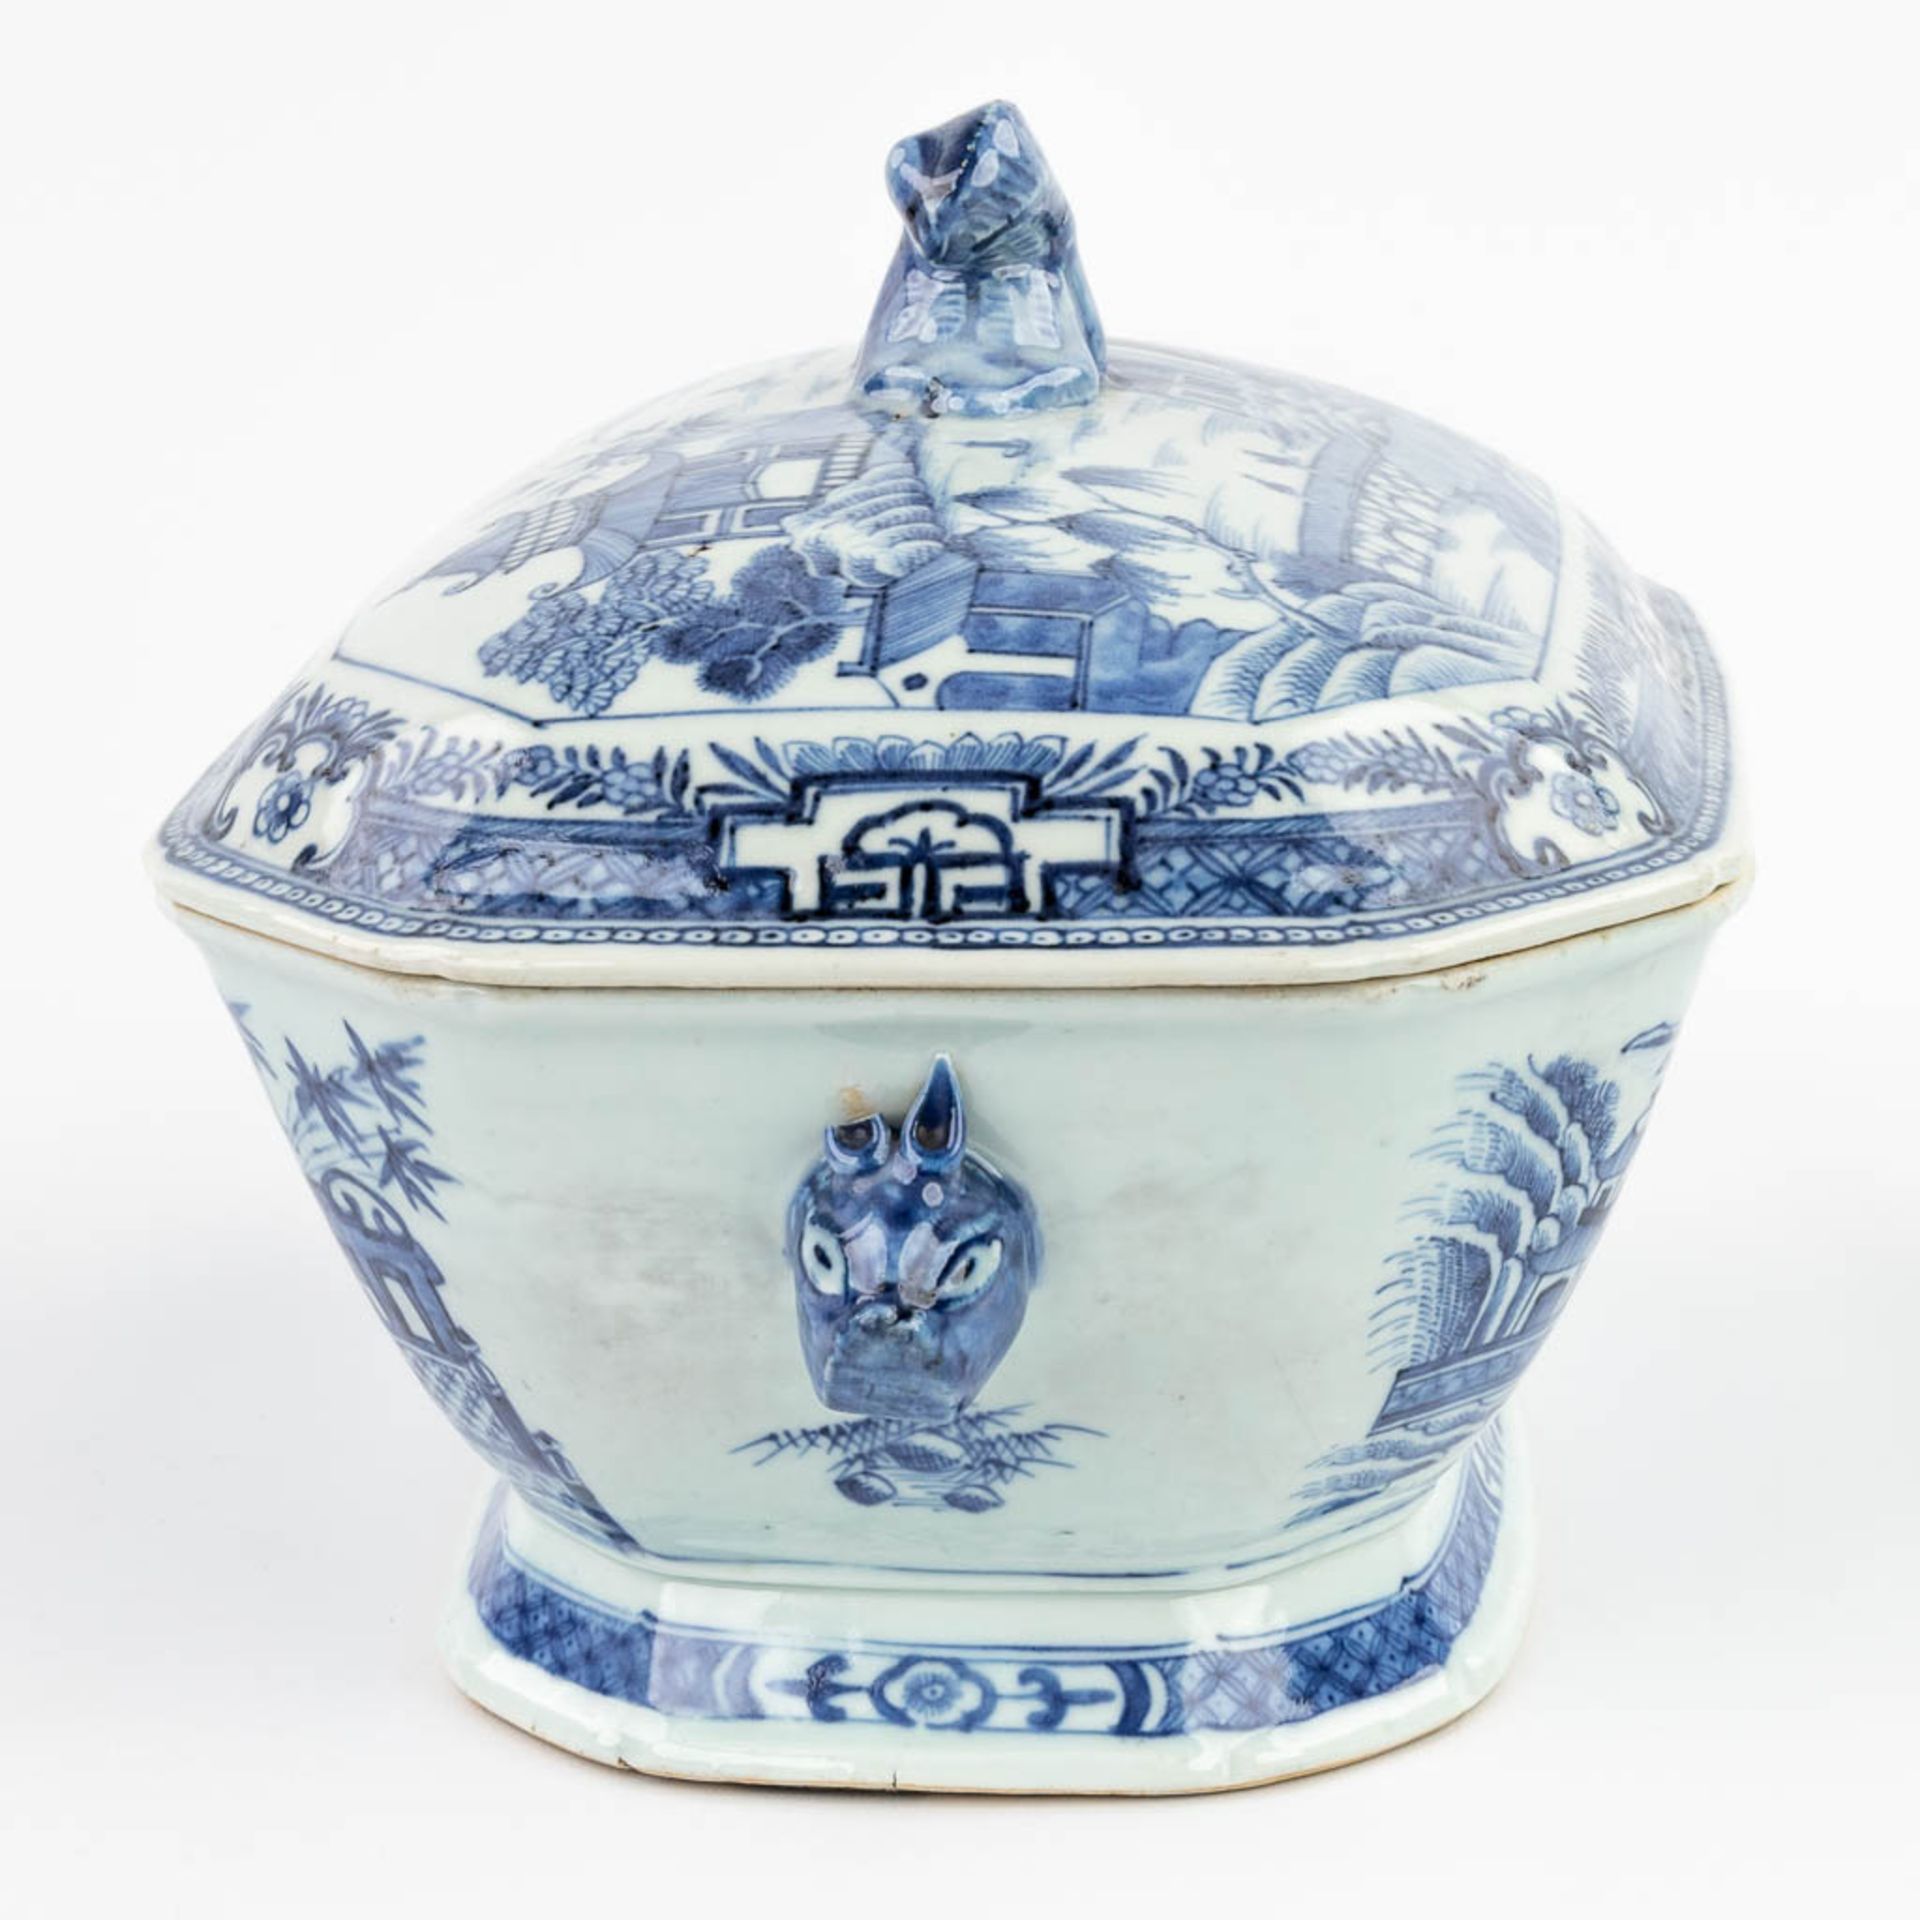 A Chinese soup tureen made of blue-white porcelain. (22 x 31 x 22 cm) - Image 15 of 15